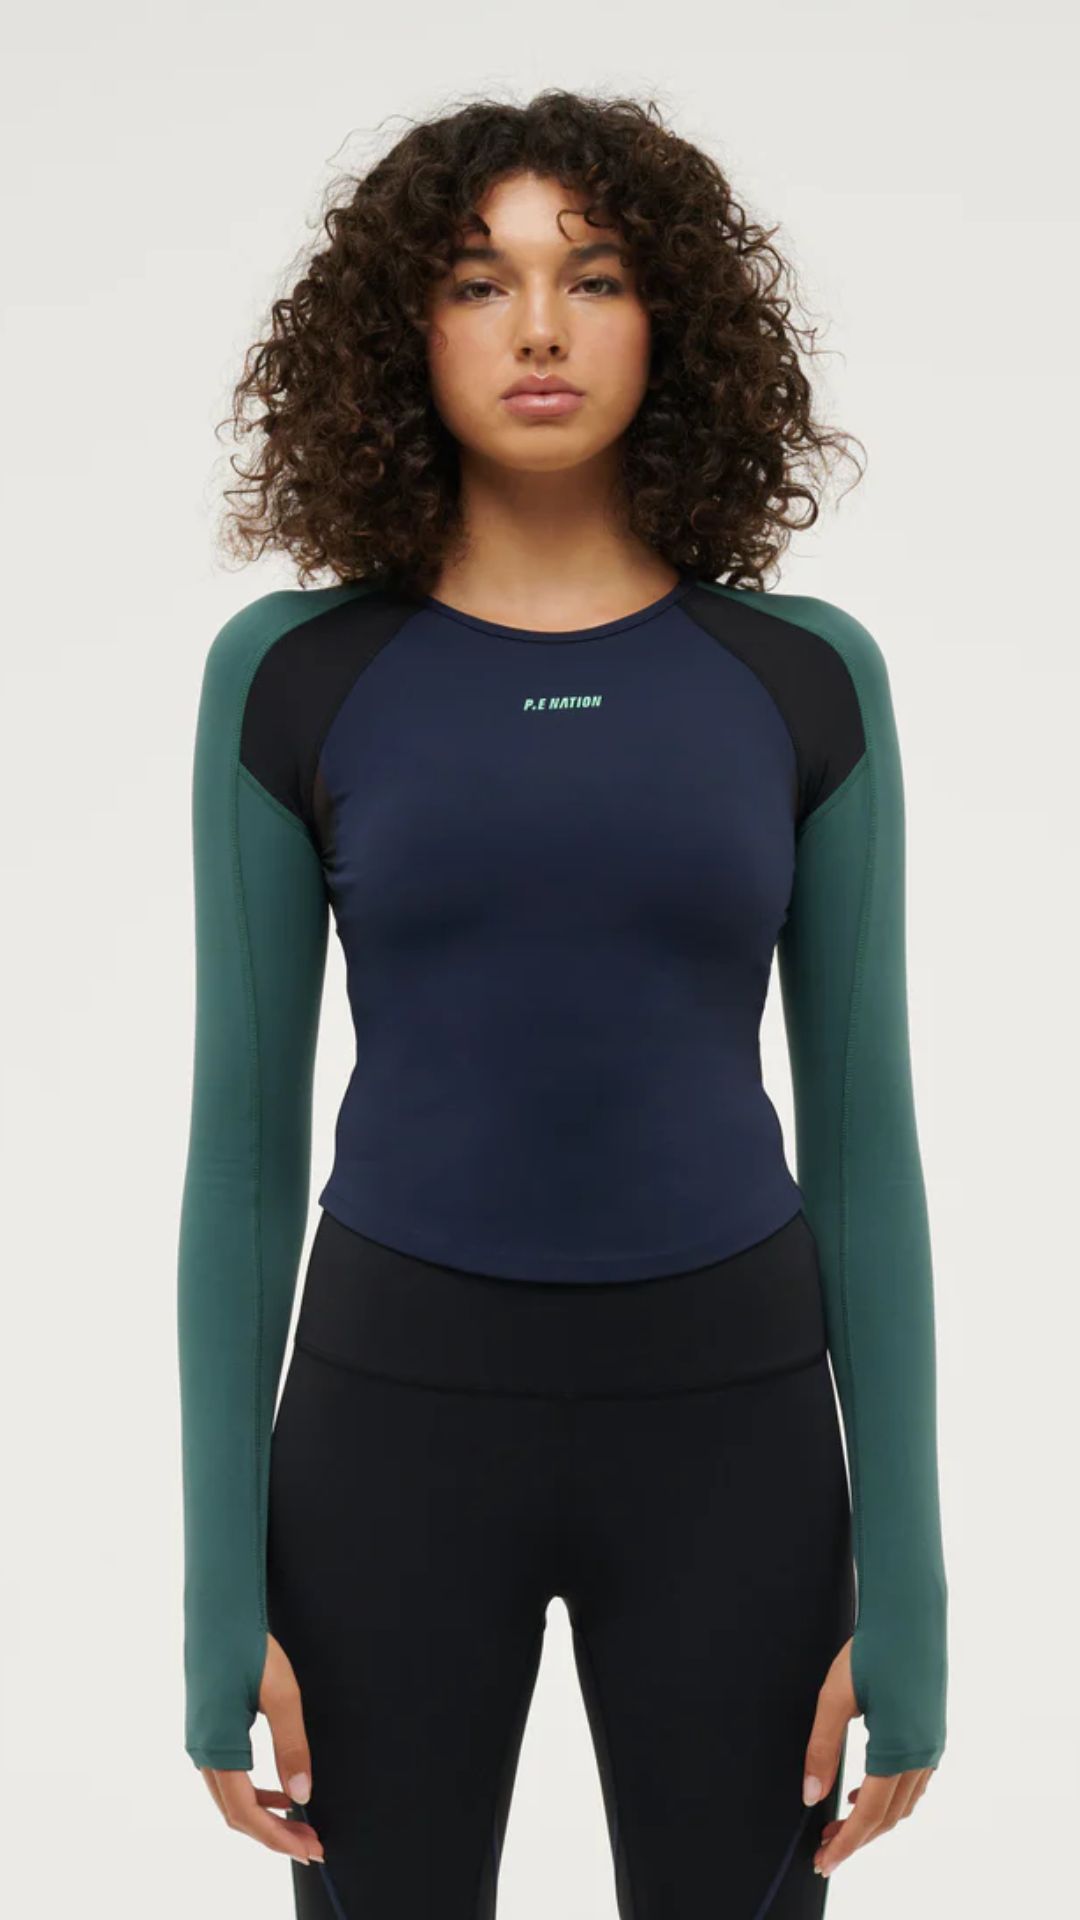 a woman with brown curly hair wears a navy and green Long-sleeve Women's Activewear Top